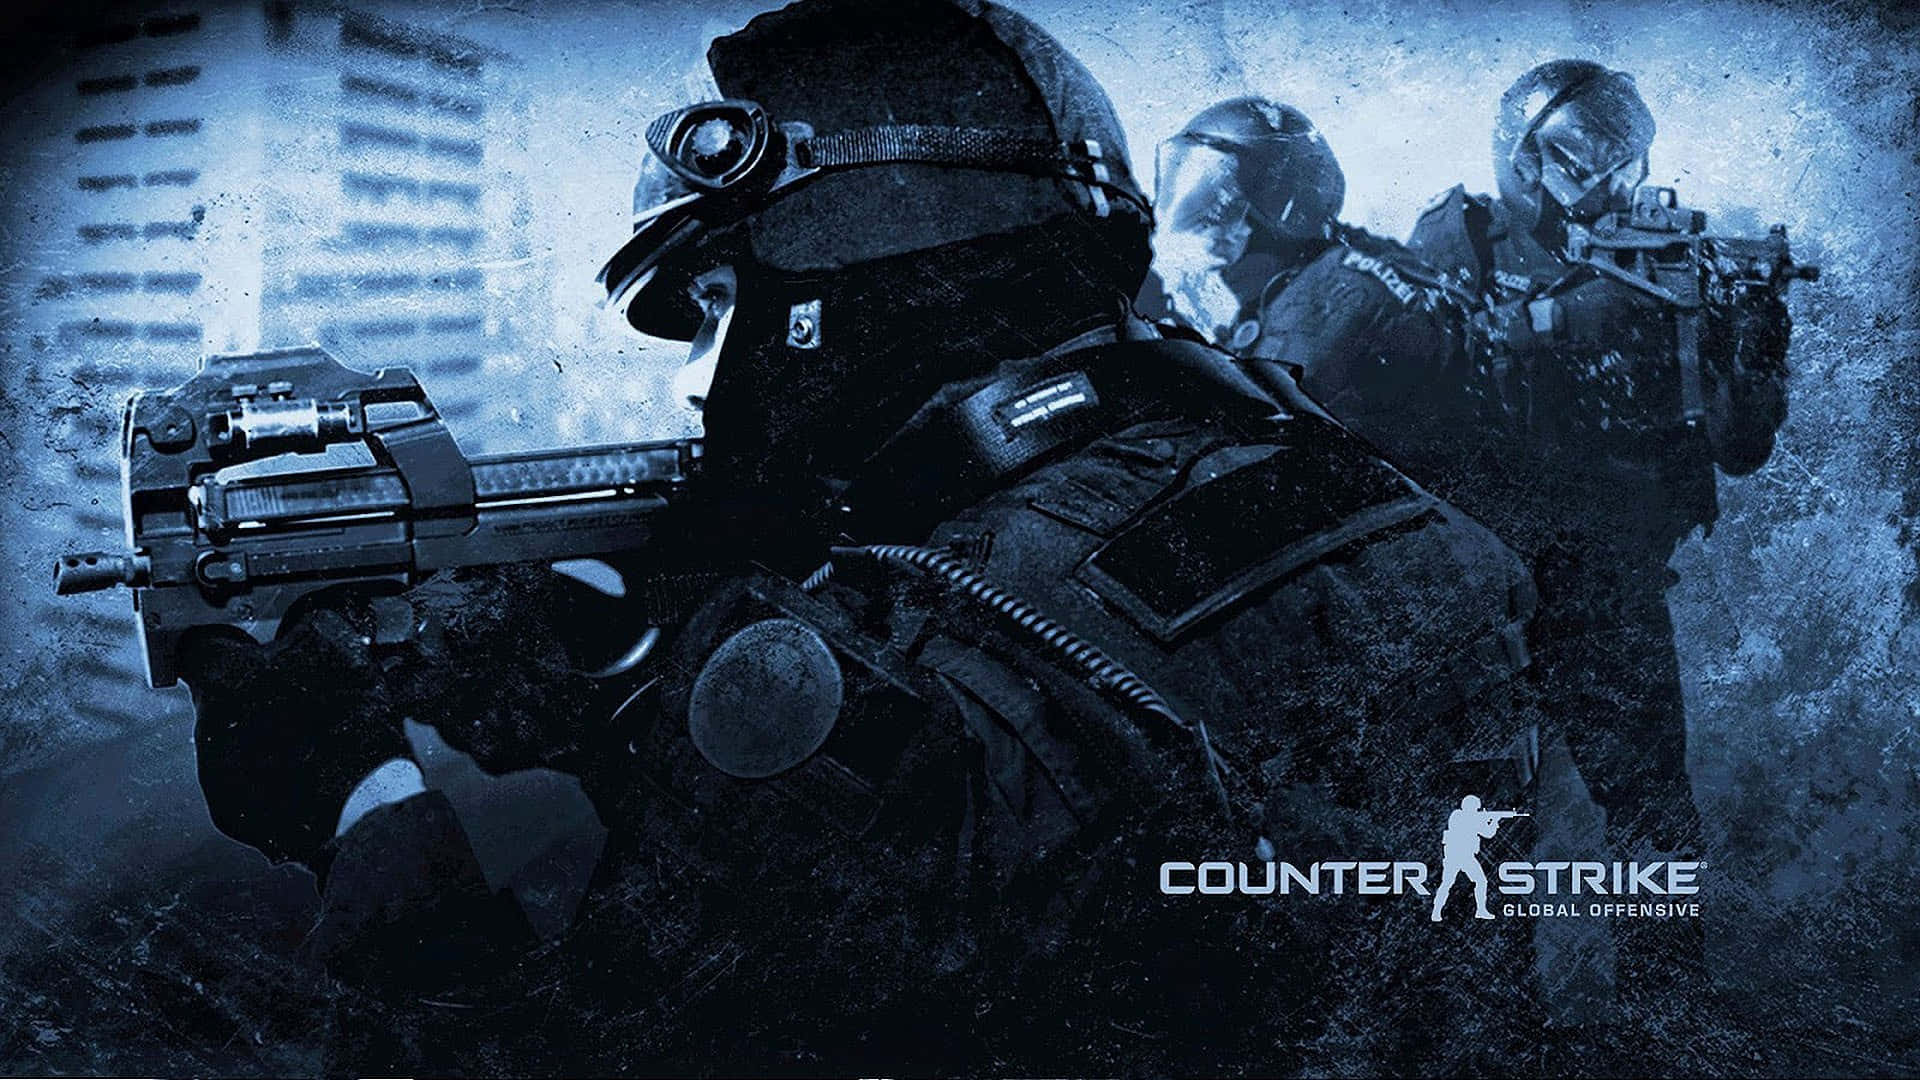 Get Ready for an Intense Fight in Counter Strike: Global Offensive